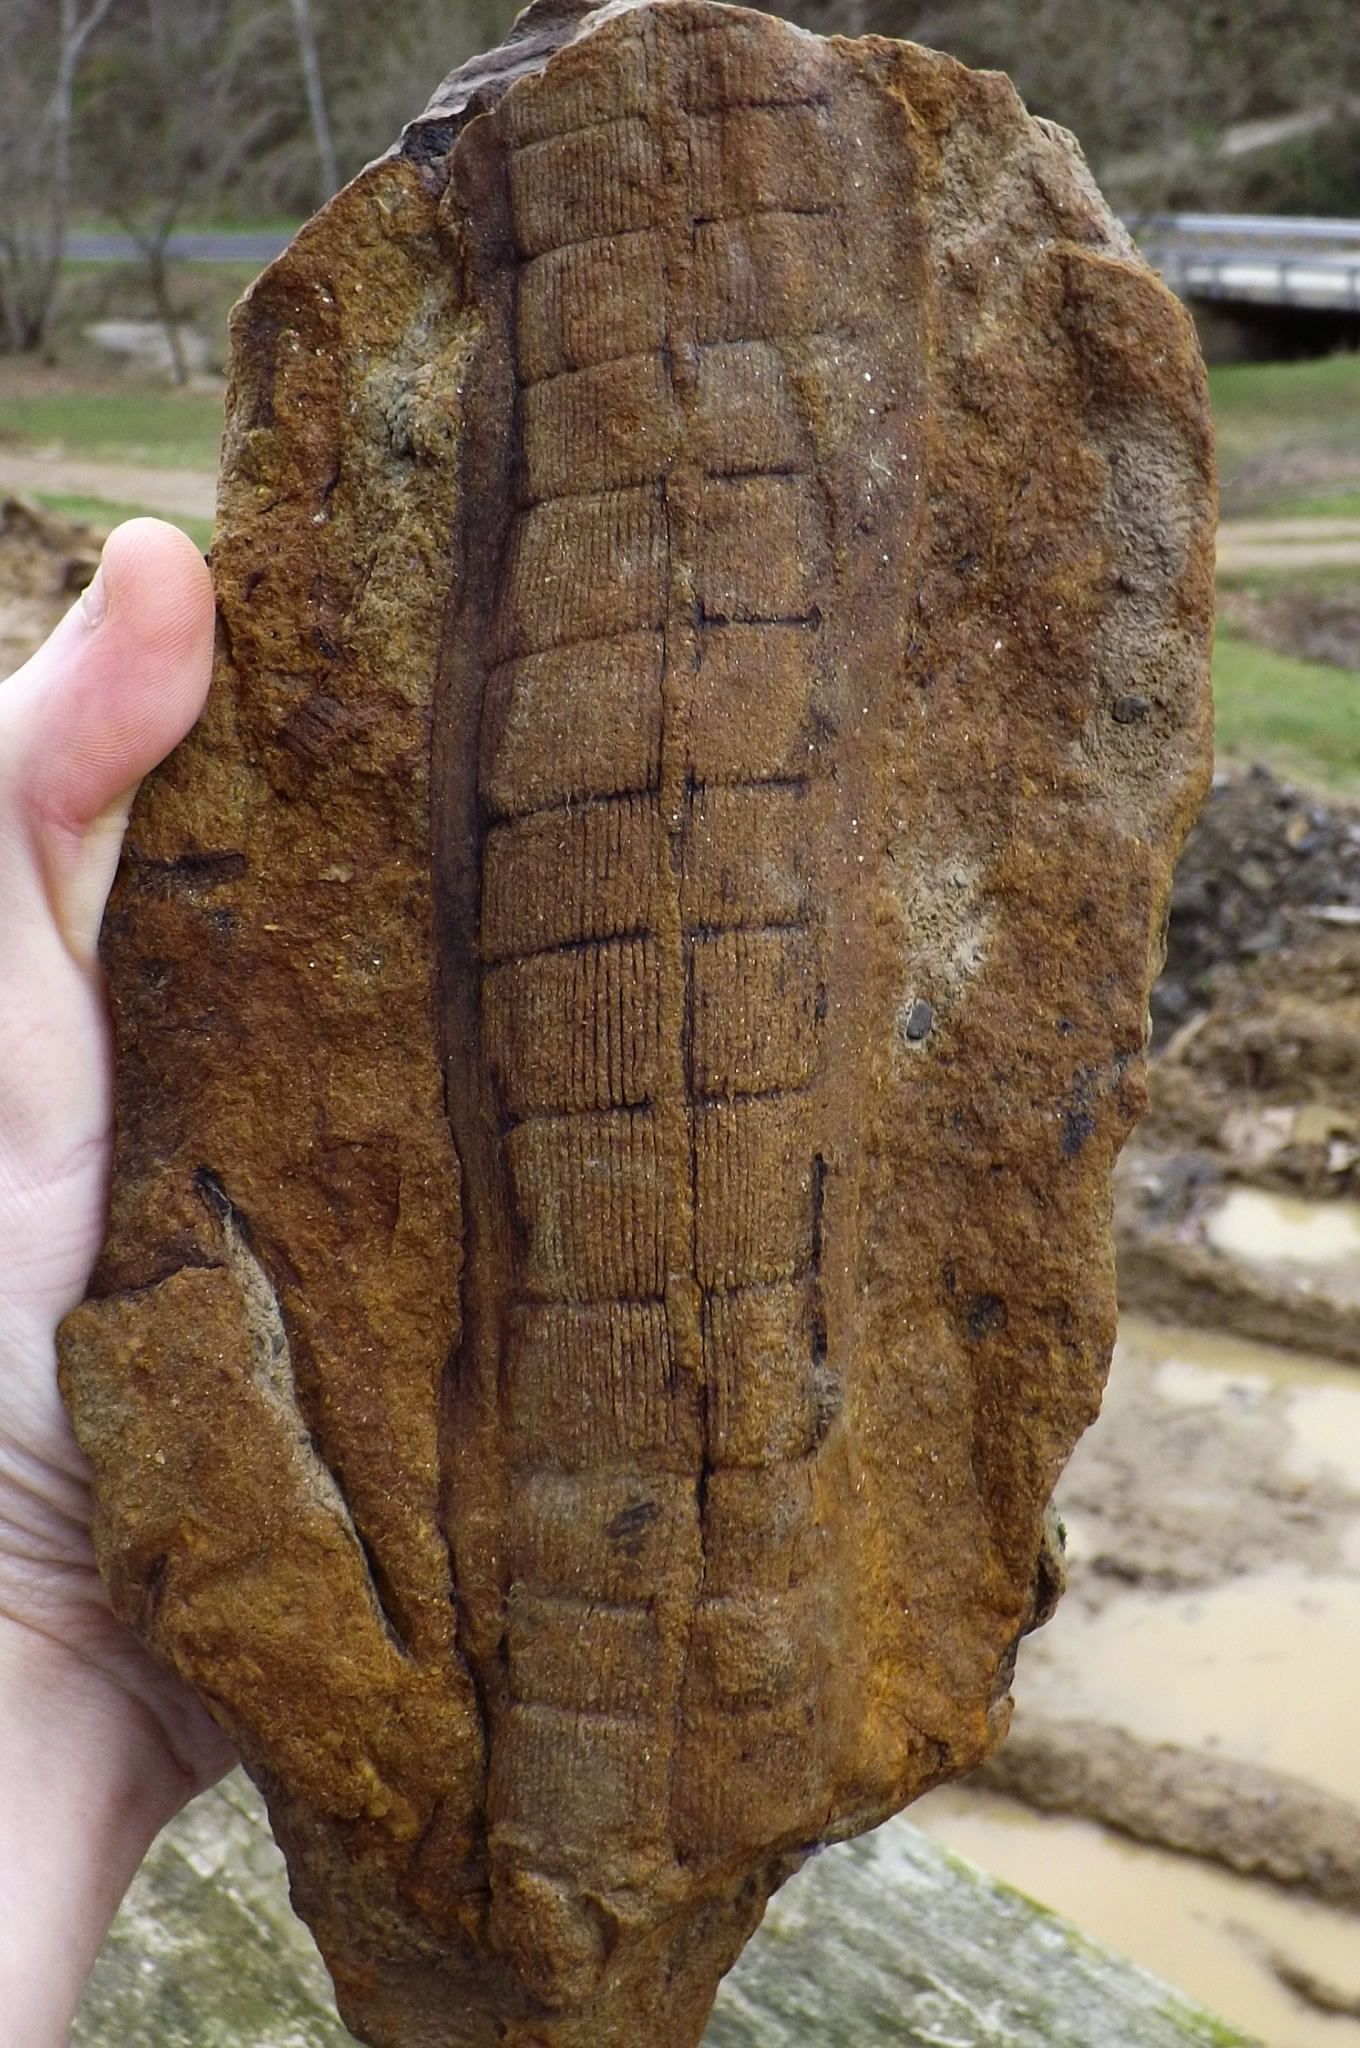 Calamites, but what species? - Fossil ID - The Fossil Forum